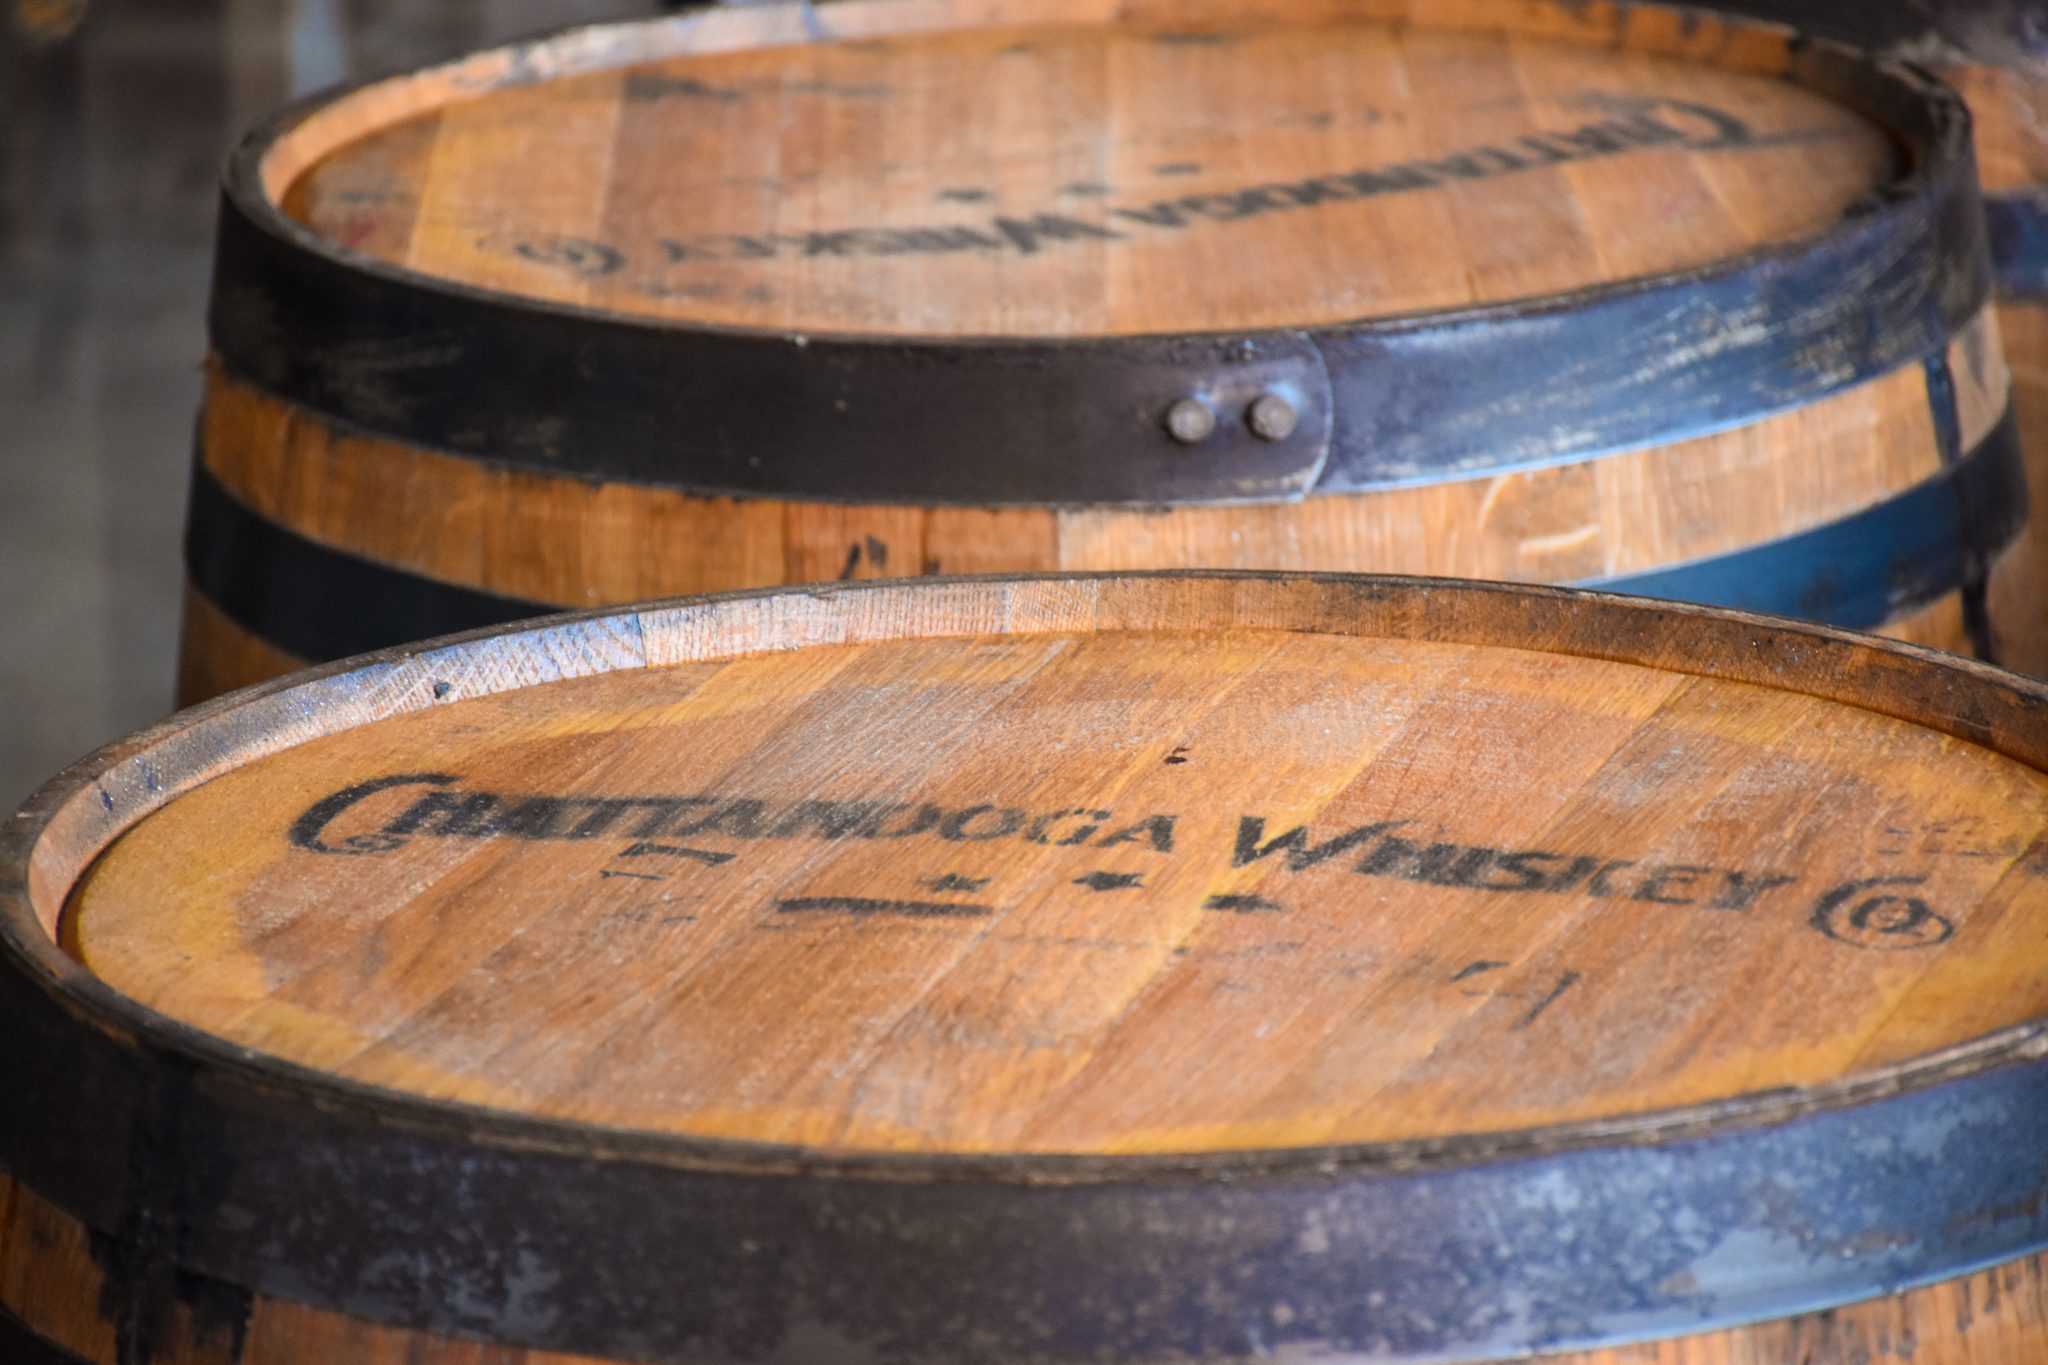 The tops of two whiskey barrels